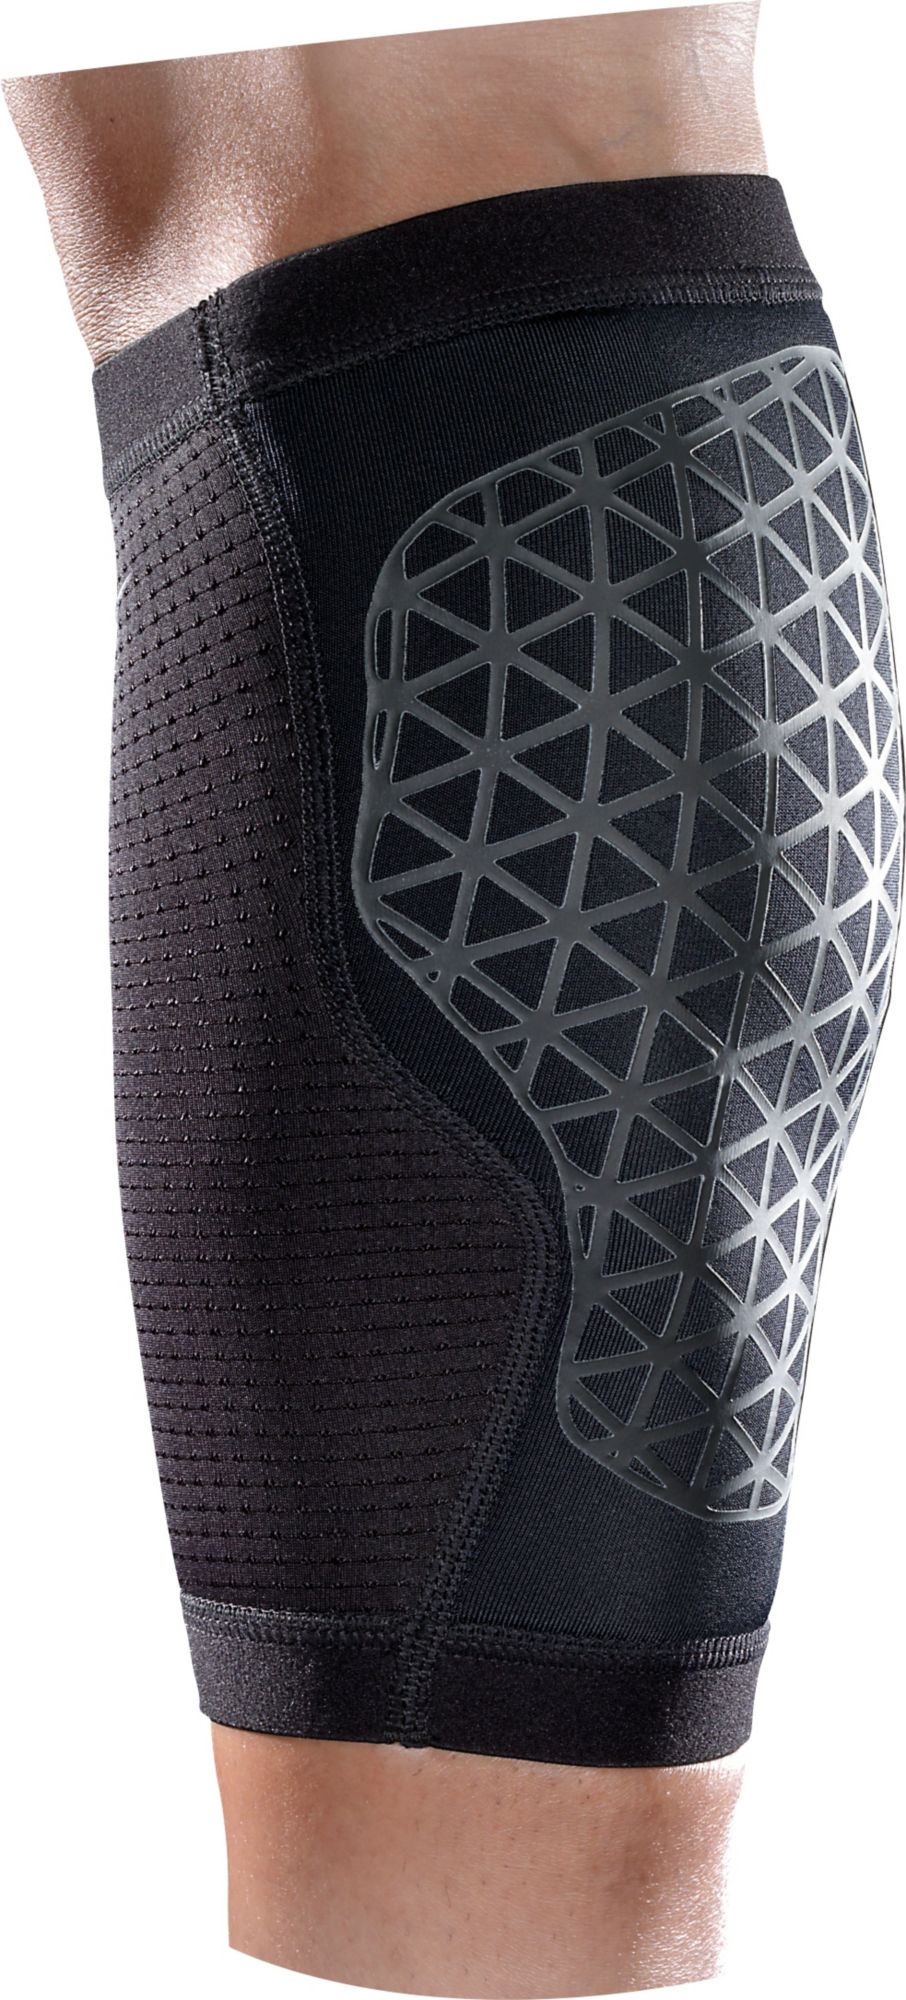 nike calf compression sleeves for running